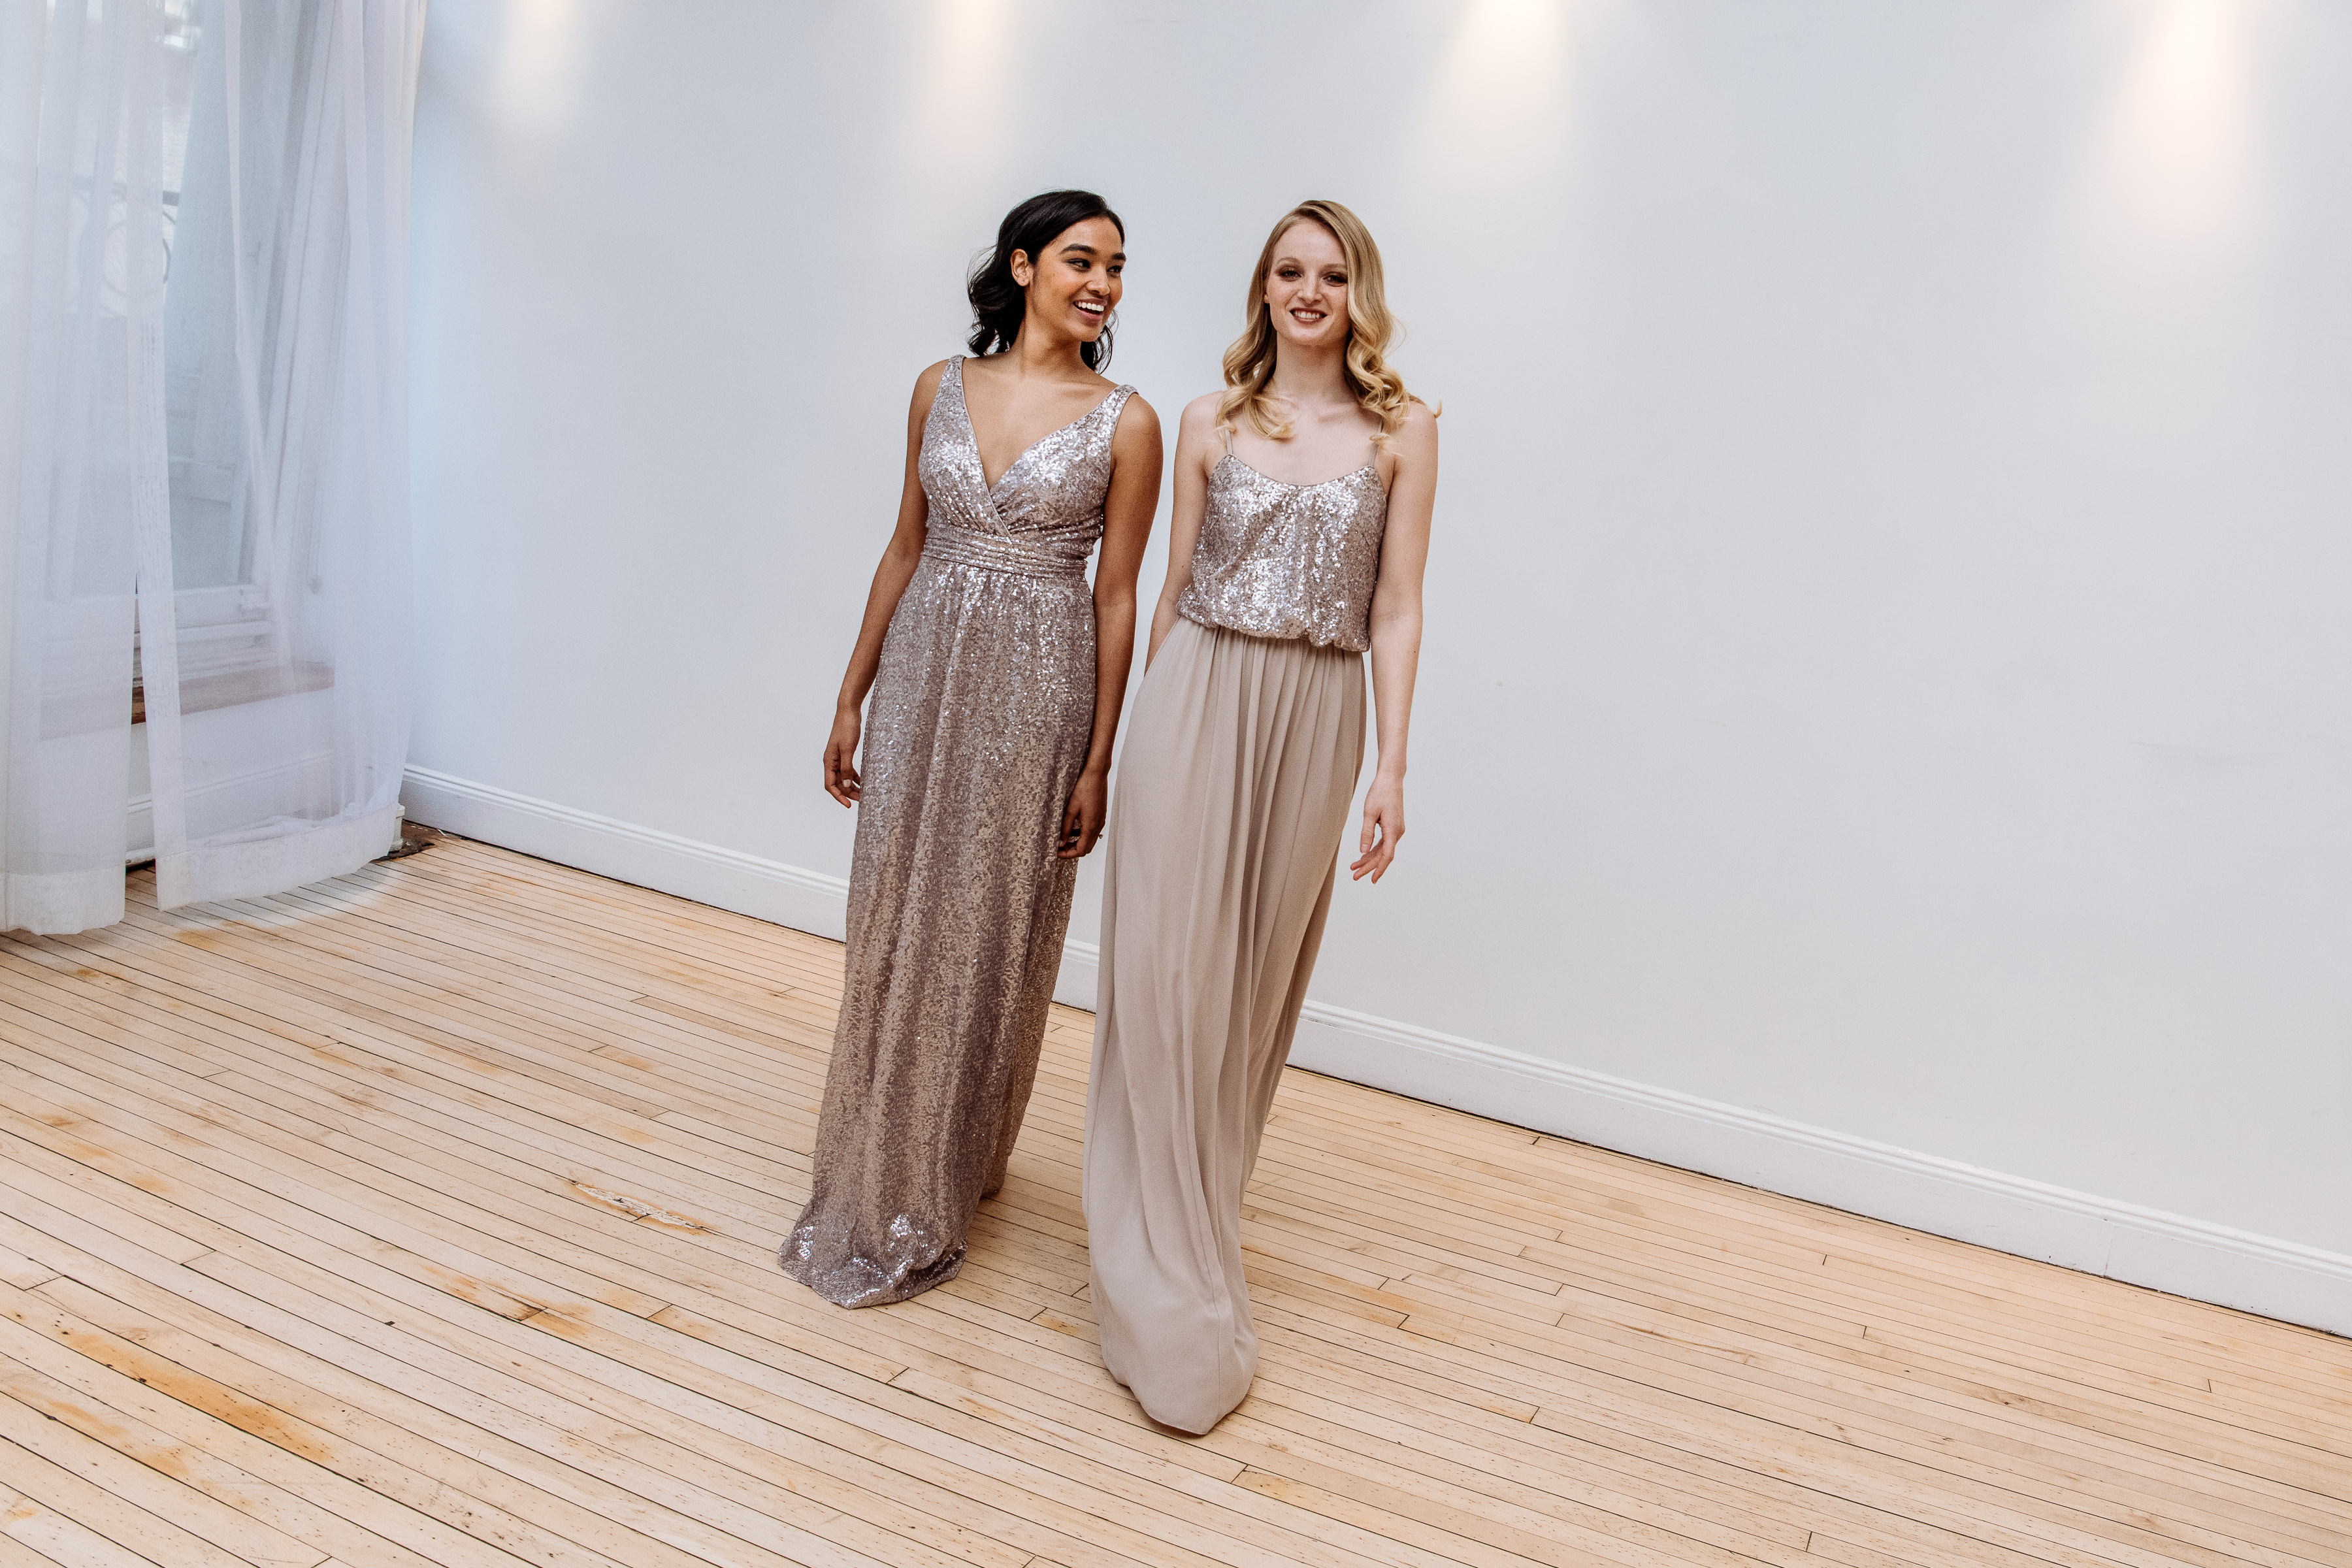 Sequin bridesmaid dresses continue to shine! See more Fall 2018 bridesmaid trends on the David's Bridal blog! 